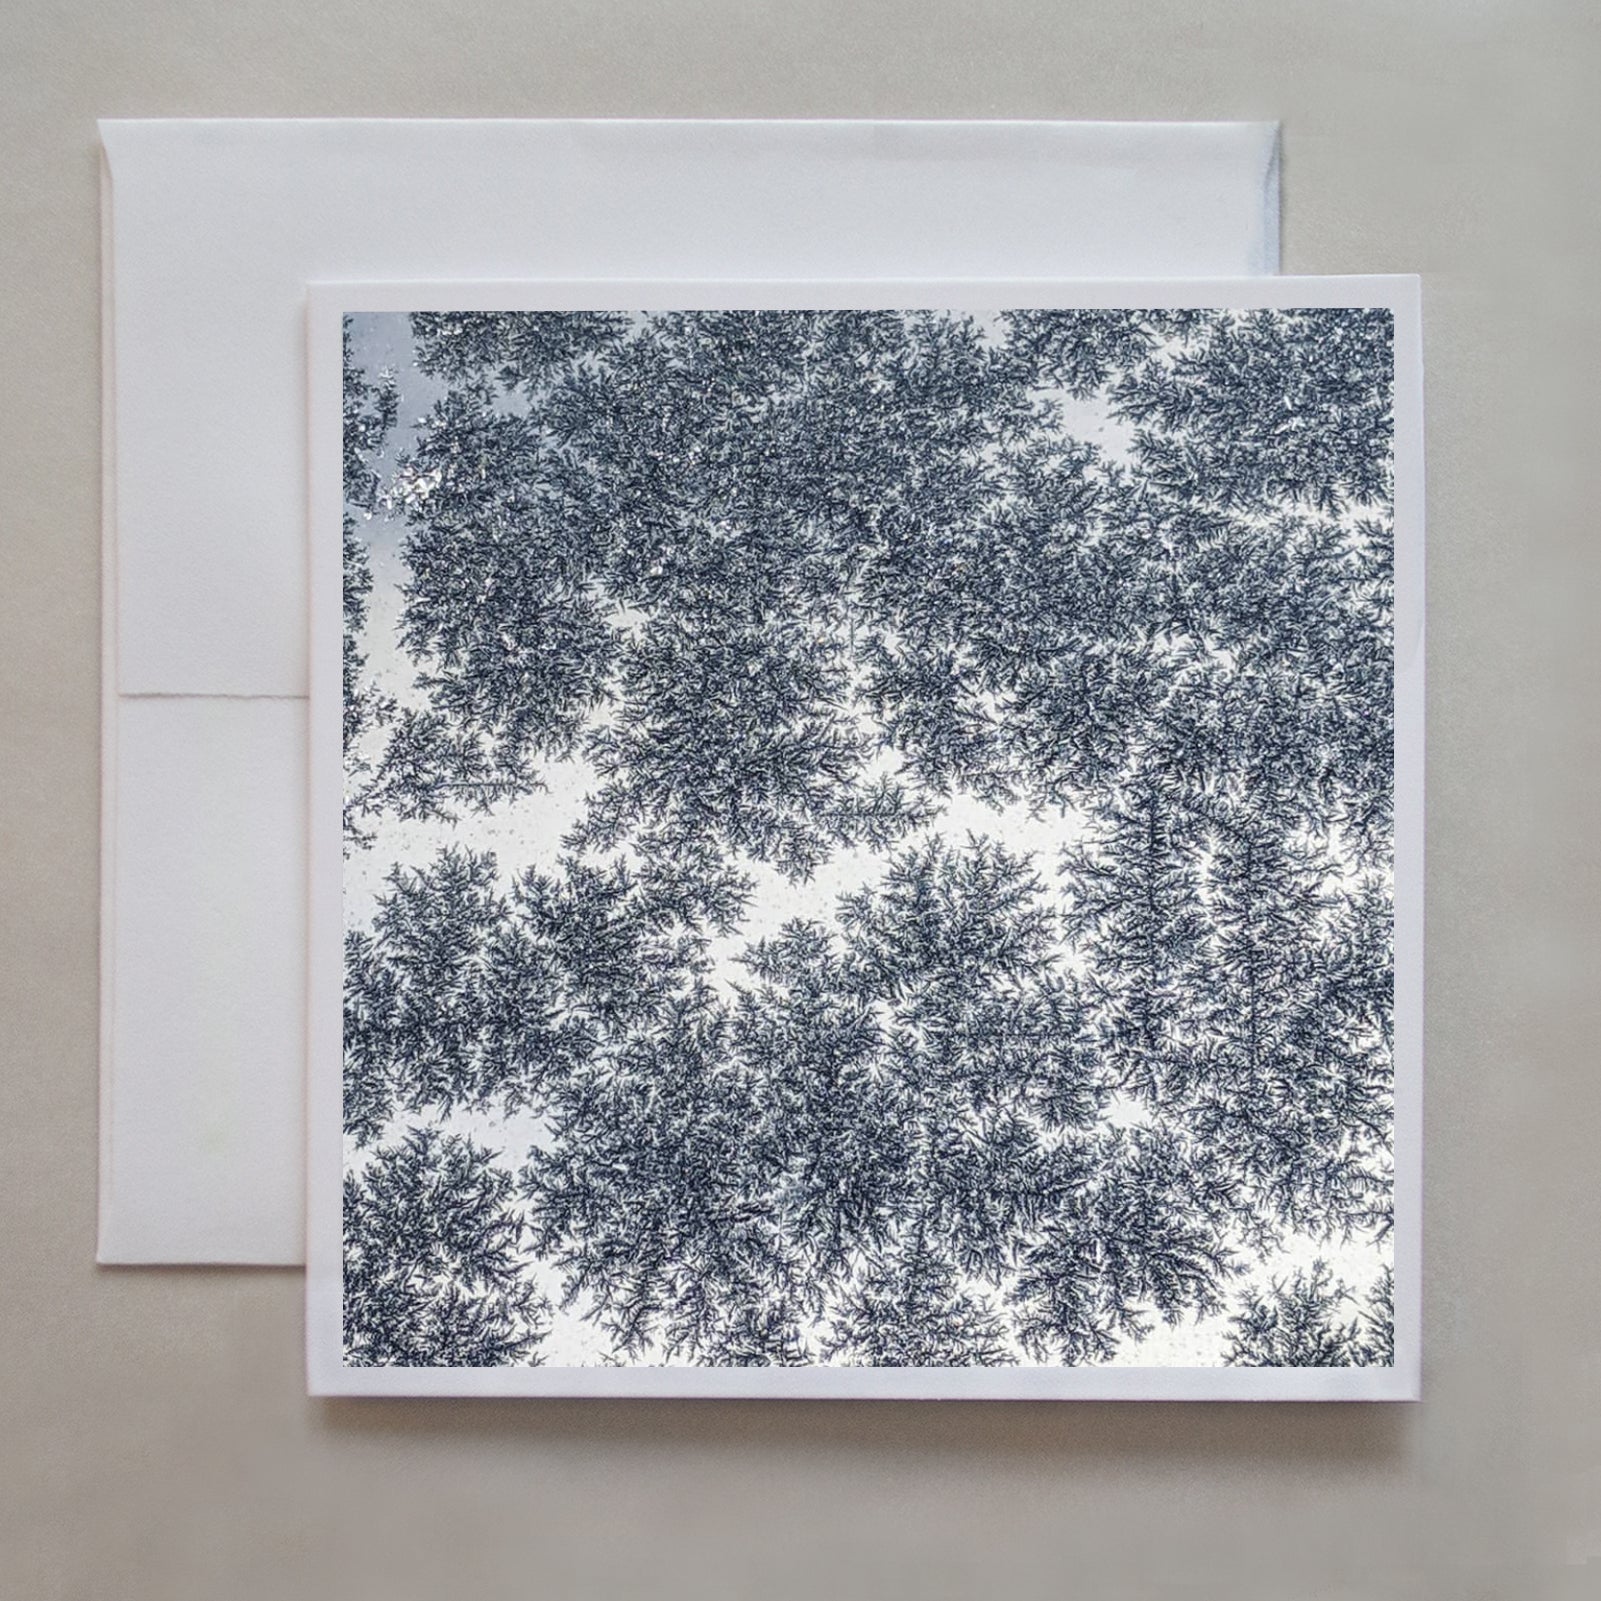 Jack Frost designed intricate crystal patterns on a window pane in this abstract greeting card by photographer Jennifer Echols.